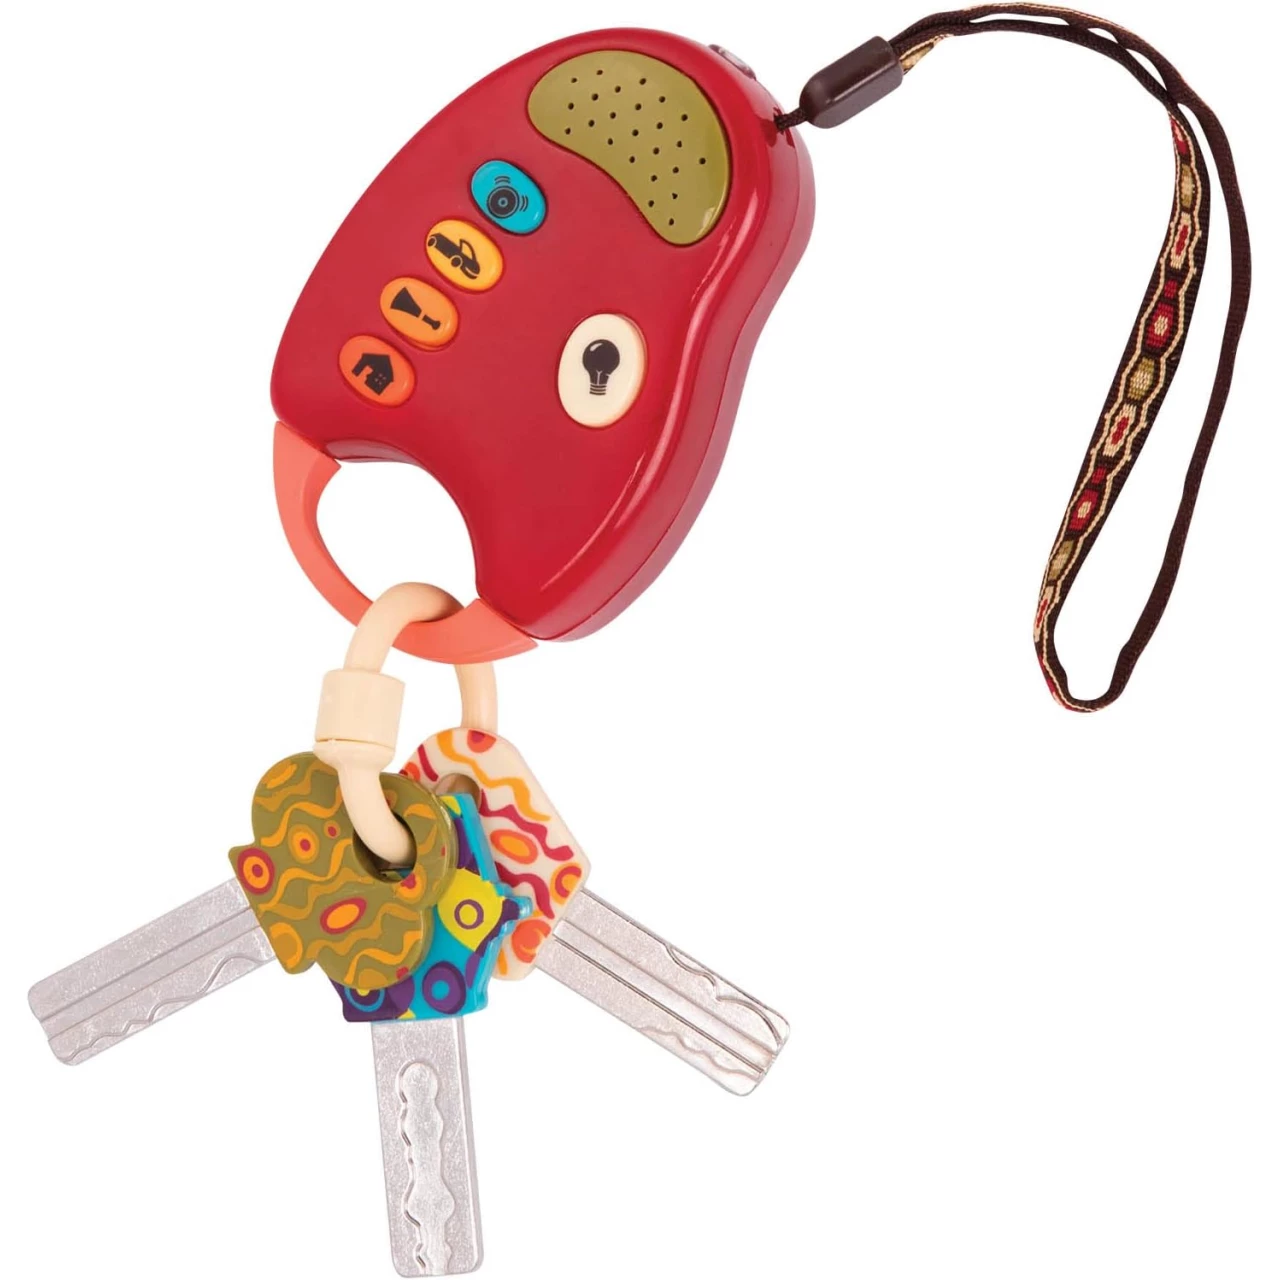 B. toys FunKeys Toy Keys For Toddlers and Babies, Red, 10 Months Plus